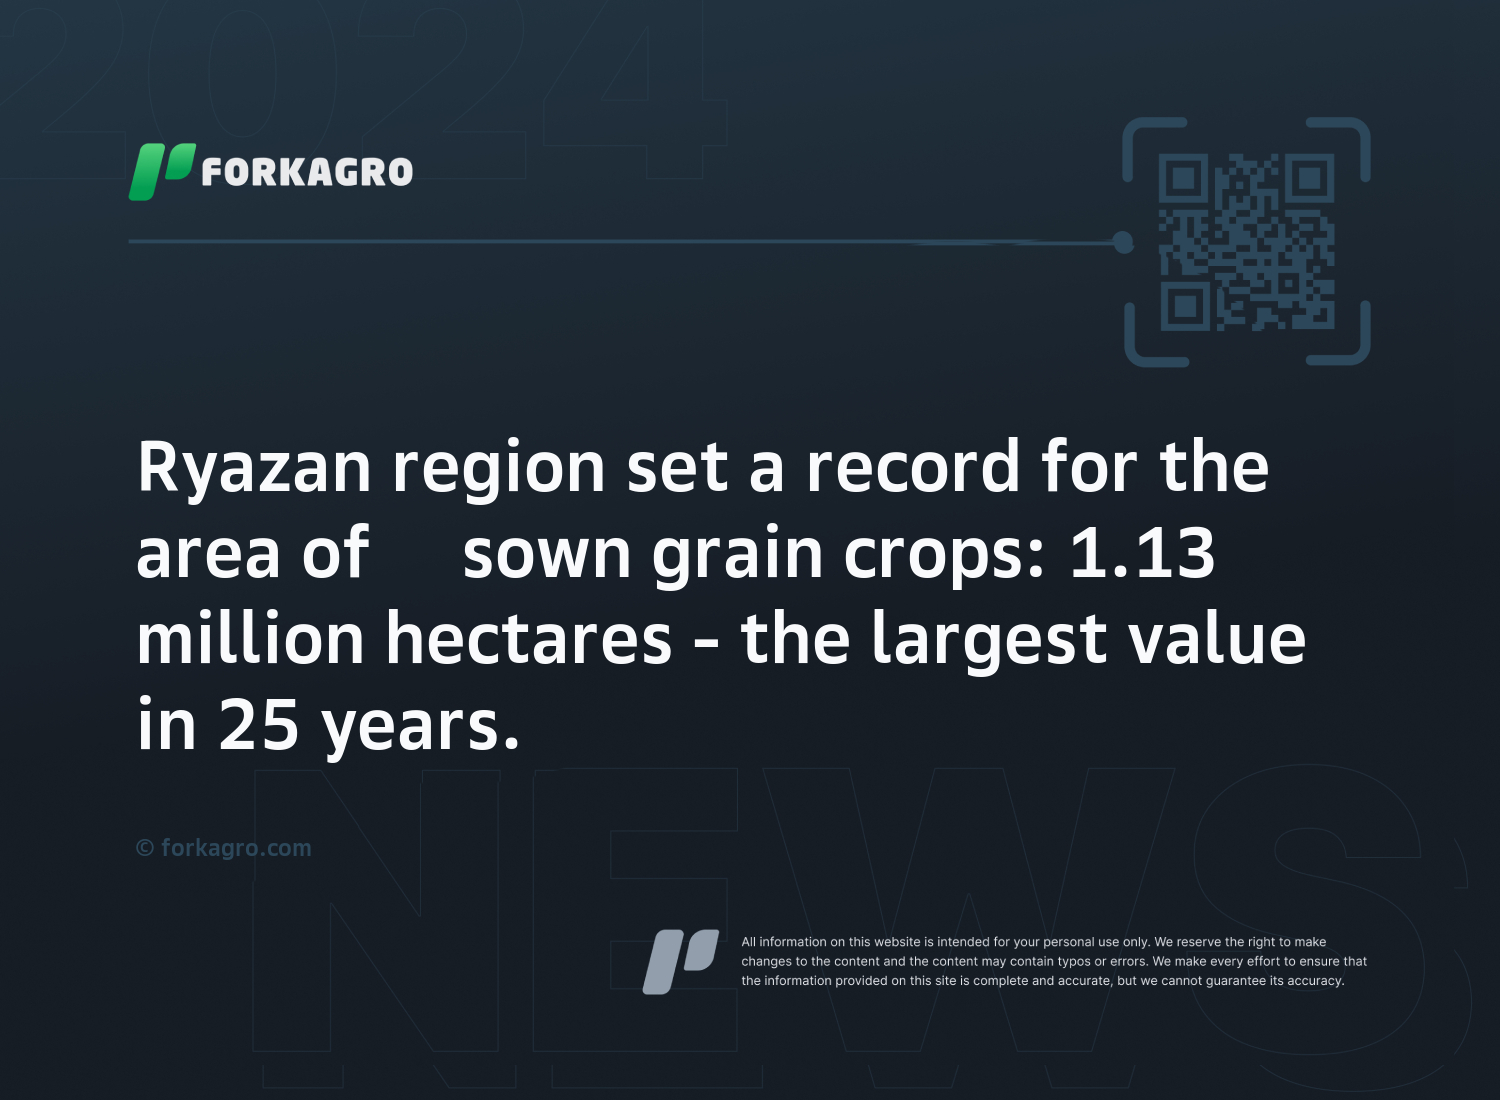 Ryazan region set a record for the area of ​​sown grain crops: 1.13 million hectares - the largest value in 25 years.